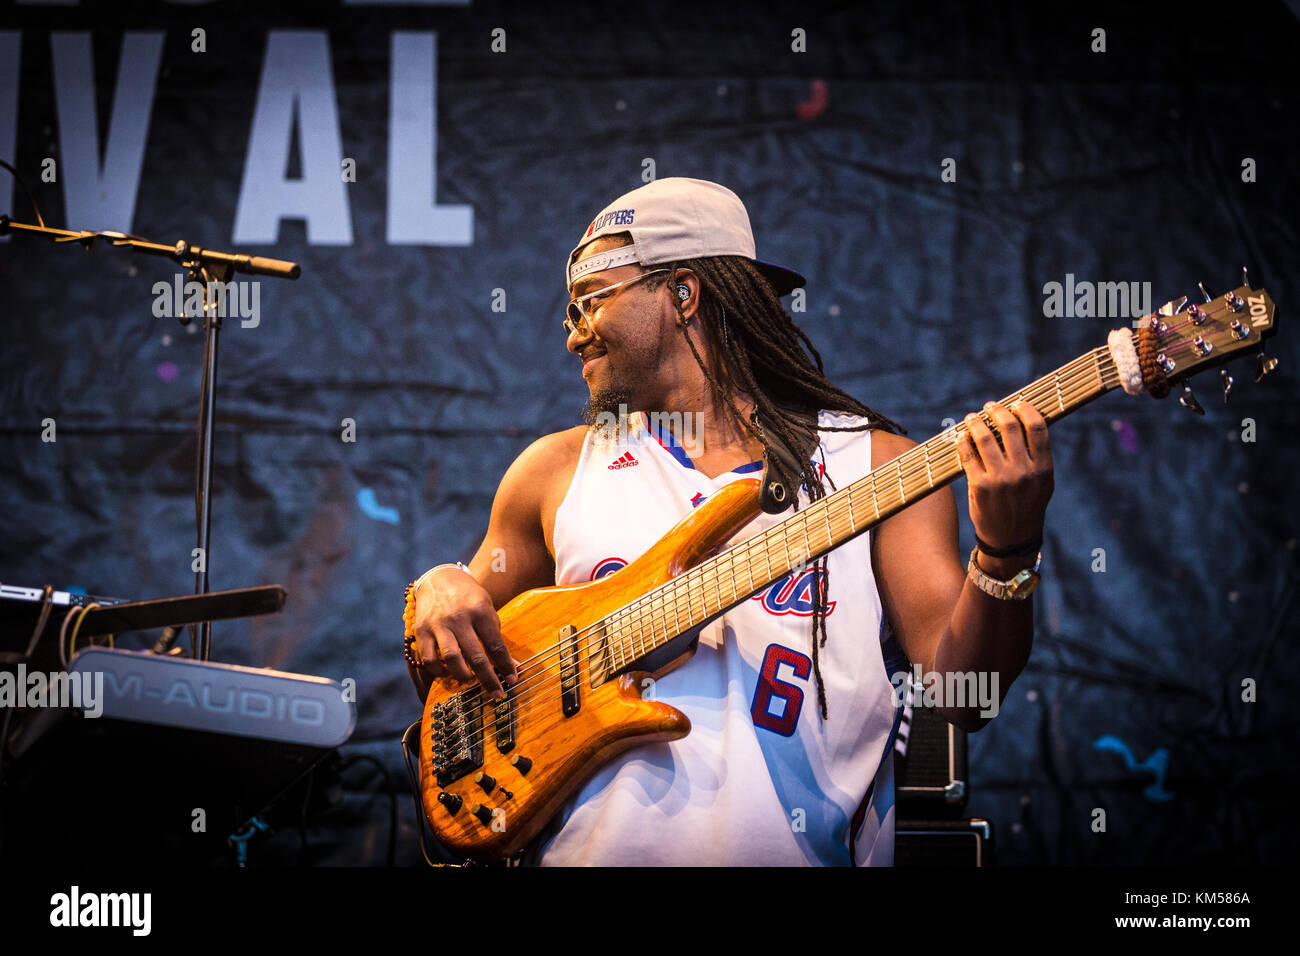 The American rapper and lyricist Oddisee performs a live concert with the live band Good Compny at the German music festival Open Source Festival 2016 in Düsseldorf. Here Live band memeber Mr. Turner is seen on bass. Germany, 09/07 2016. Stock Photo